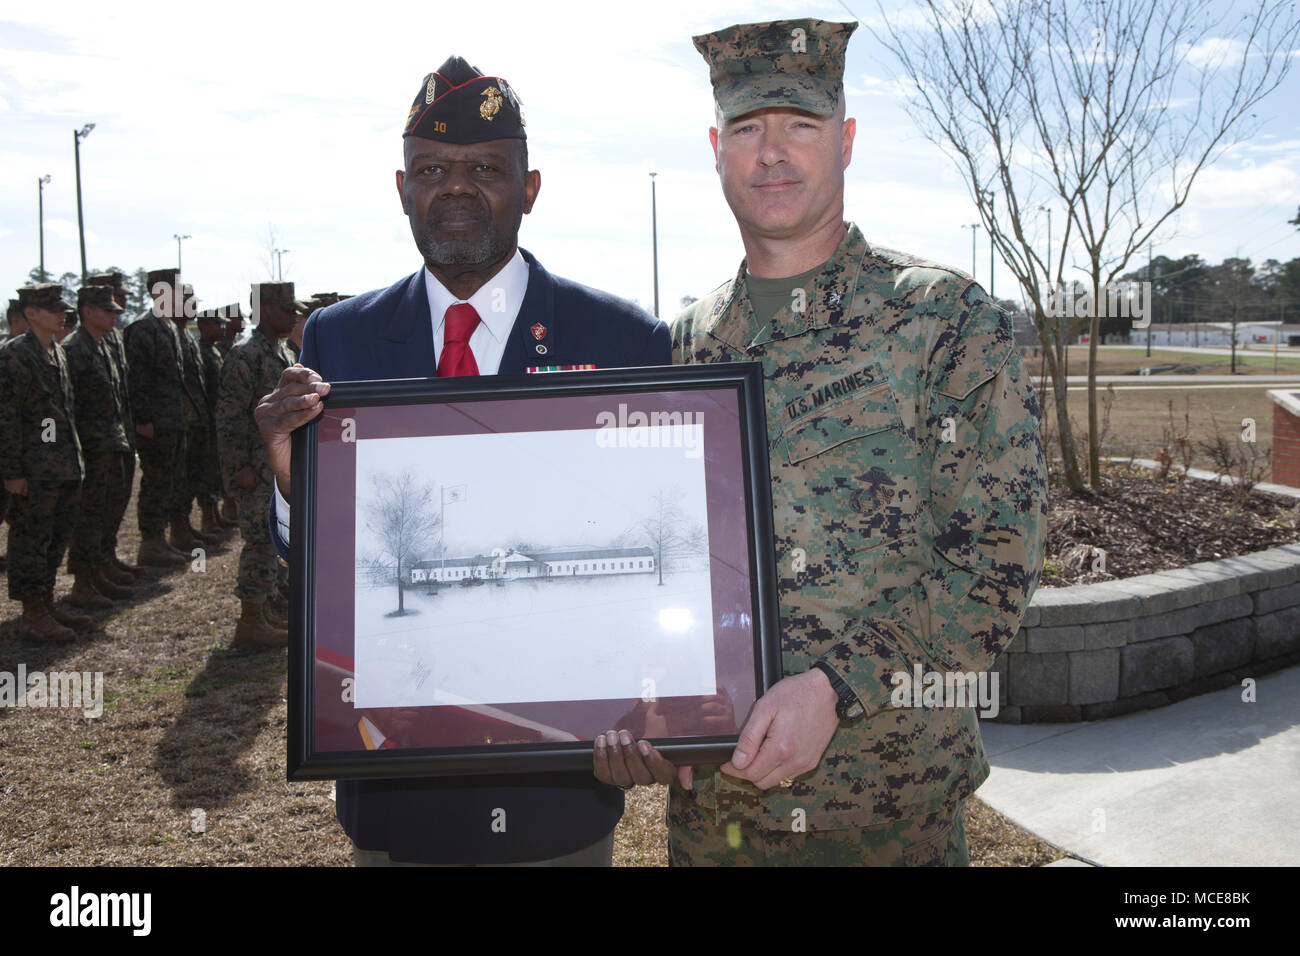 U.S. Marine Corps Col. David P. Grant, right, commanding officer of Marine Corps Combat Service Support Schools, presents a gift to Sgt. Maj. Johnny B. Young, USMC (Ret.) at Camp Johnson, N.C., Feb. 15, 2018. Marines and civilians gathered at the Montford Point Museum to celebrate African American History Month. (U.S. Marine Corps photo by Lance Cpl. Luis E. Zamot III) Stock Photo